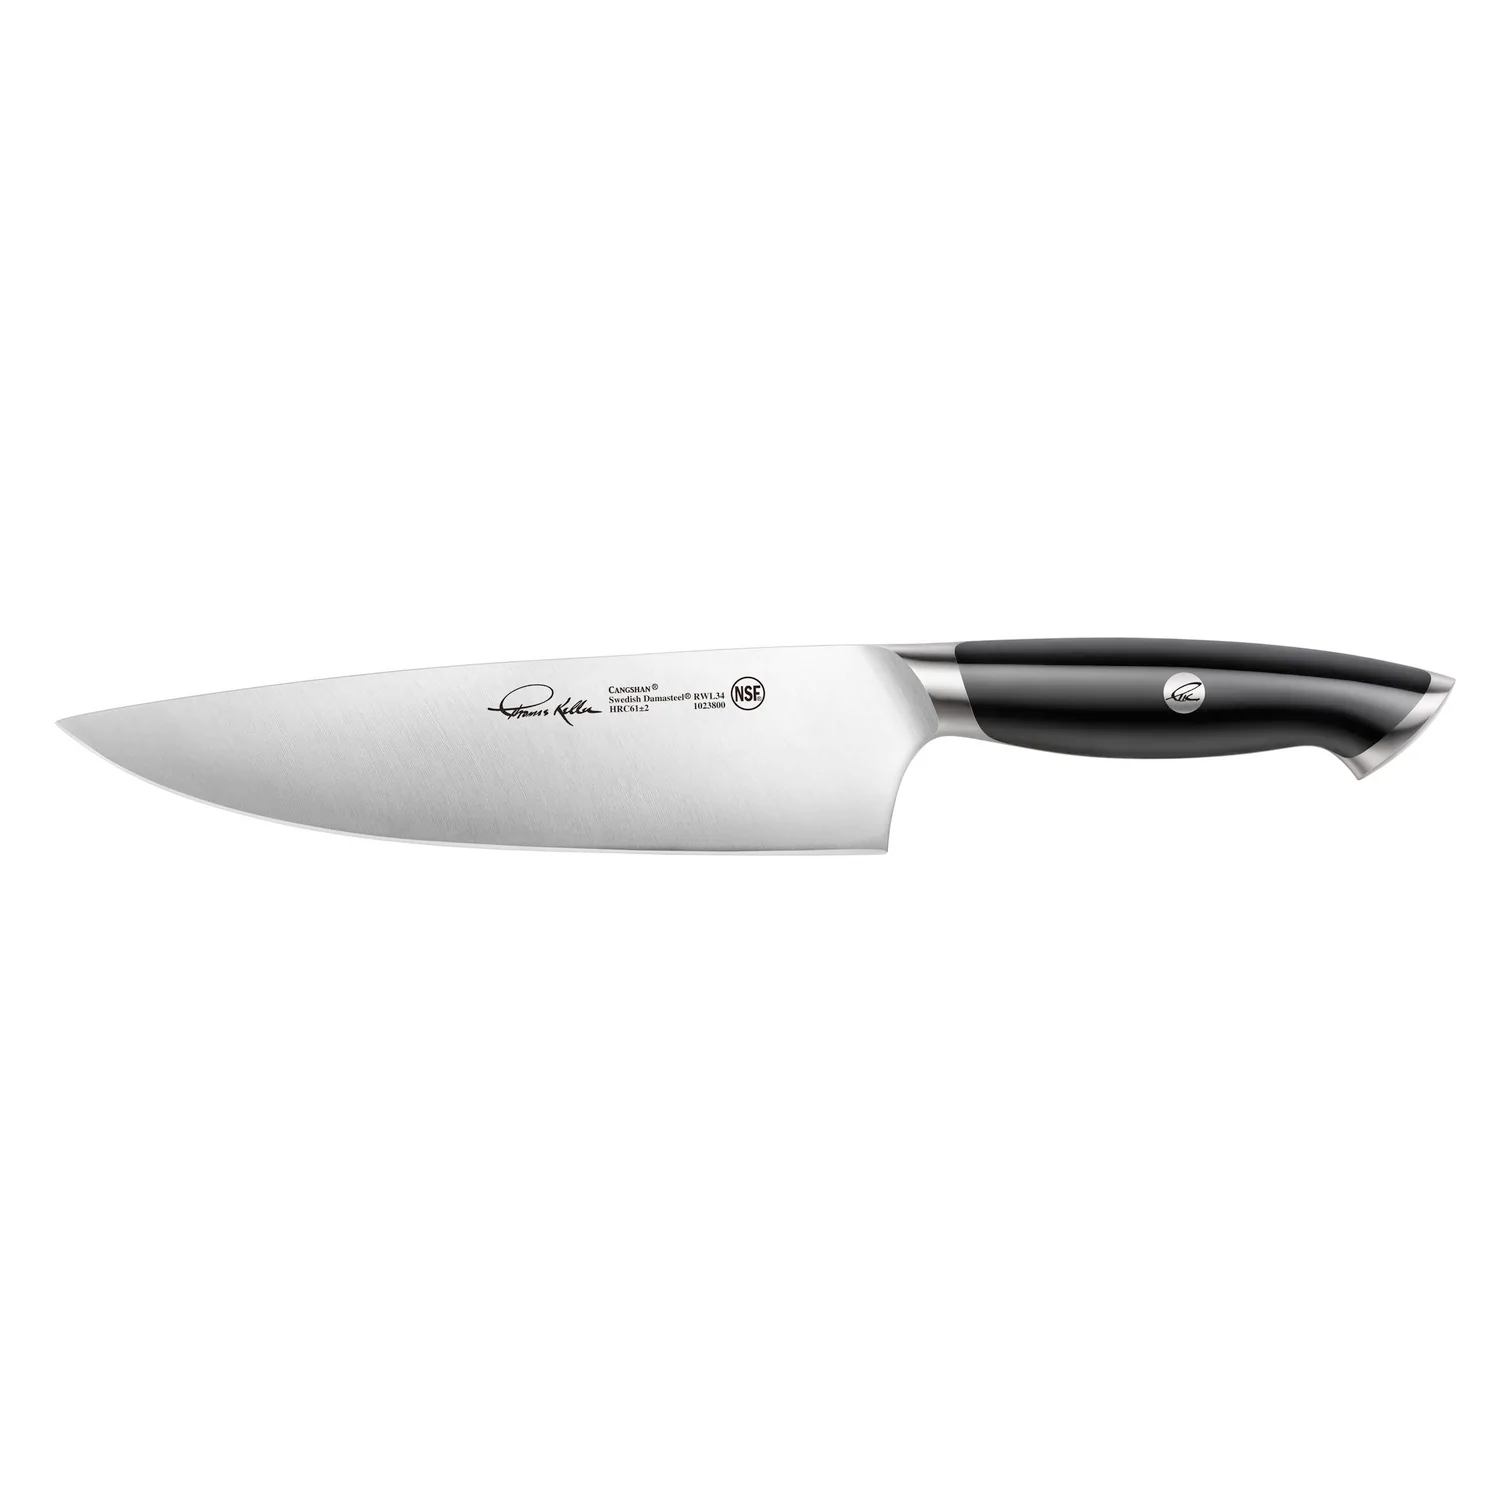 Thomas Keller Signature Collection 8" Chef's Knife